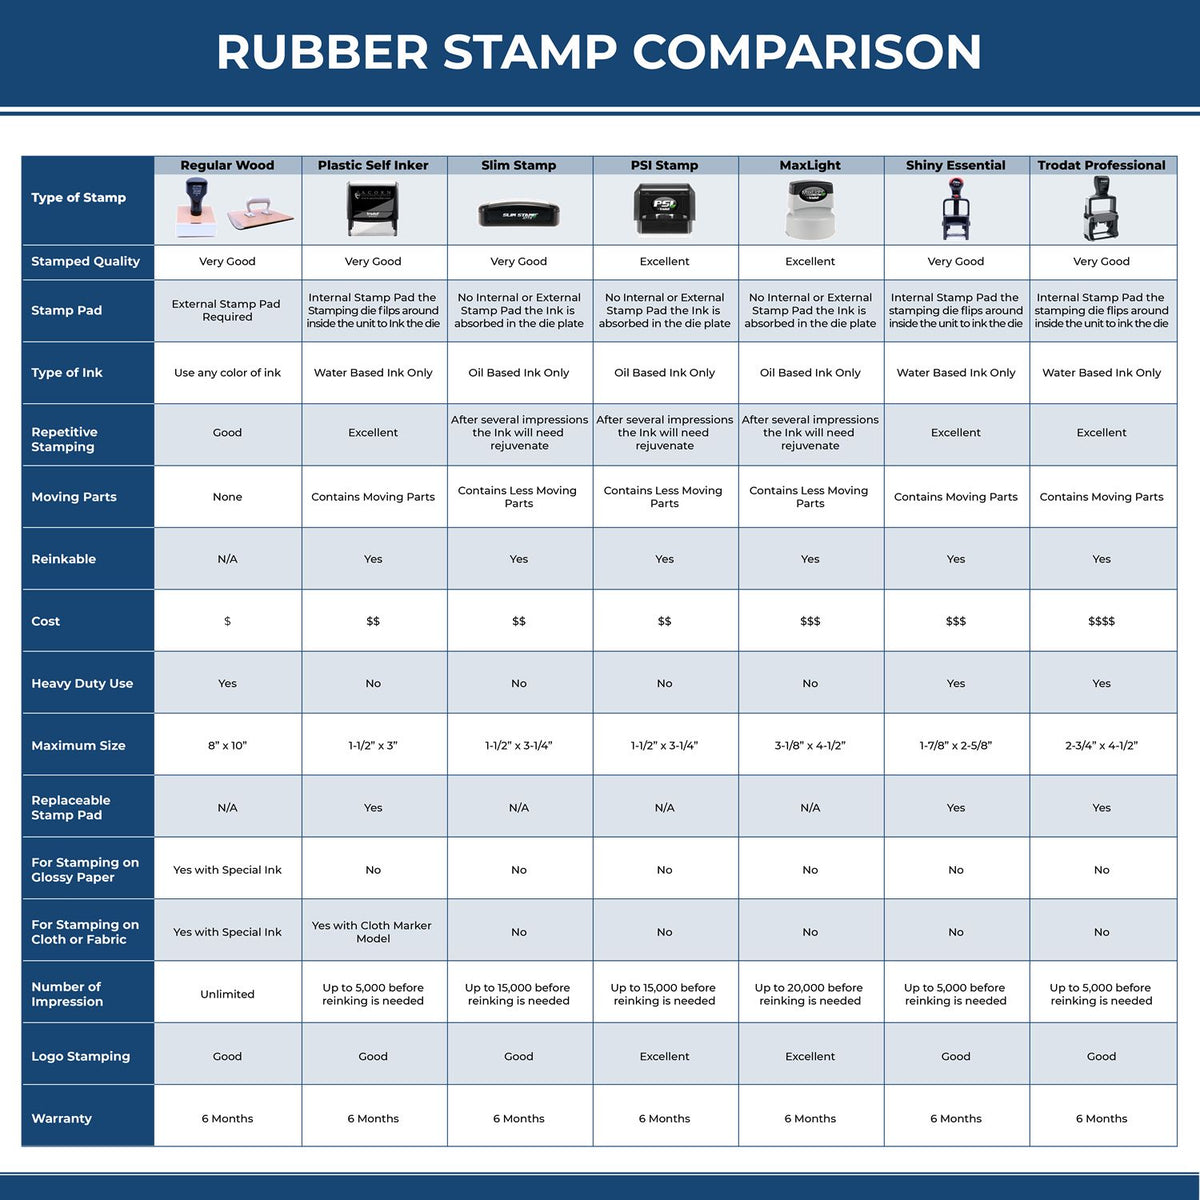 Large Self-Inking Received with Line Stamp 5633S Rubber Stamp Comparison